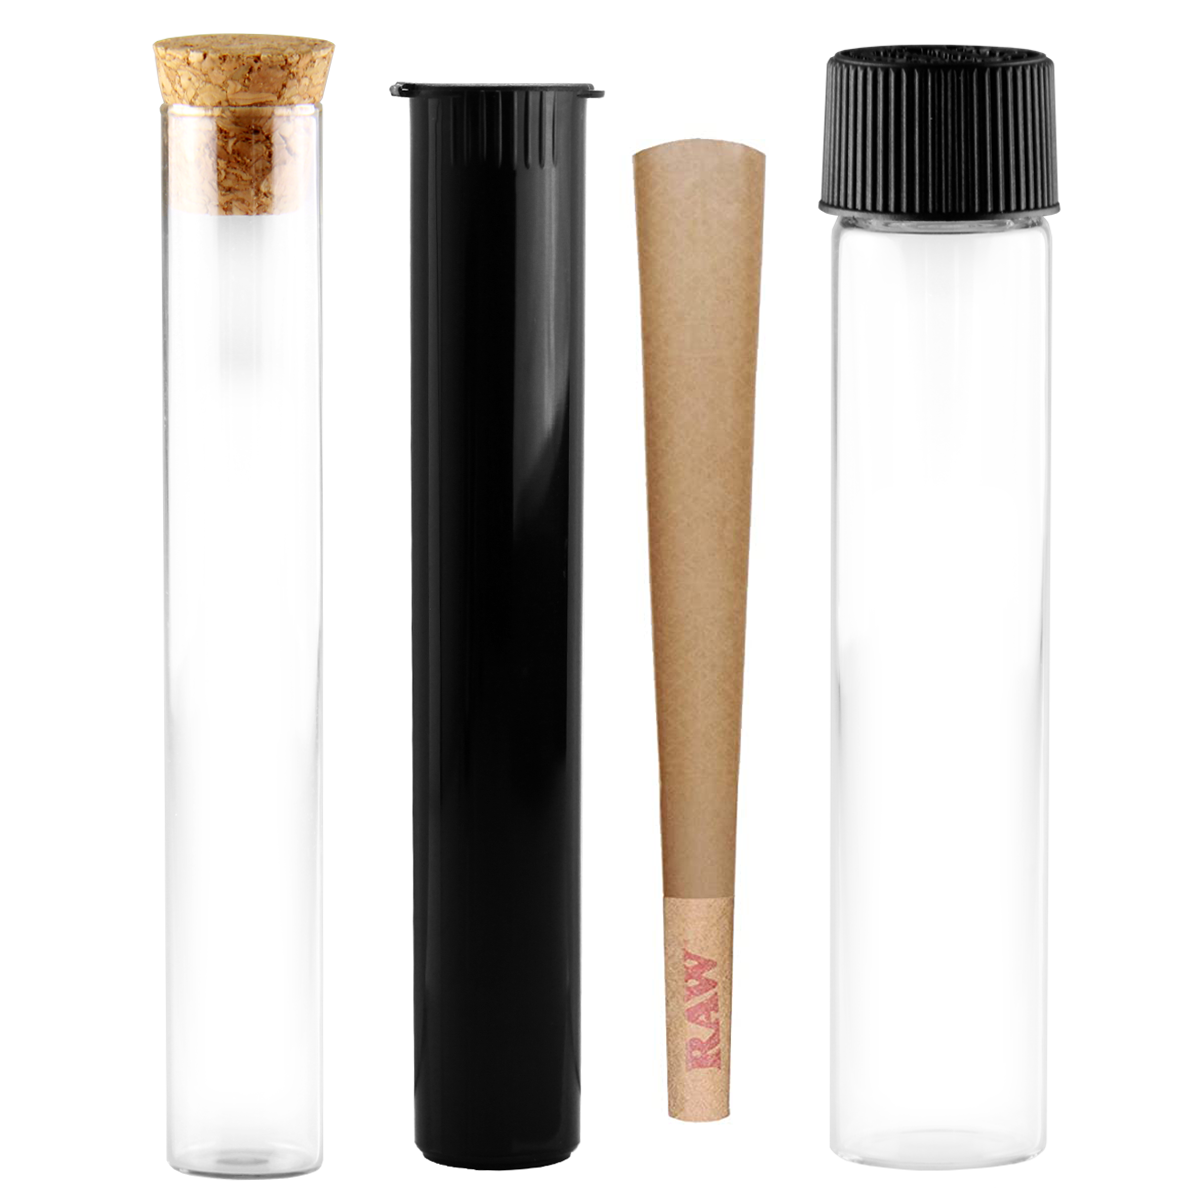 98mm Clear Pre Roll Tubes (600Qty) - Bulk Wholesale Marijuana Packaging,  Vape Cartridges, Joint Tubes, Custom Labels, and More!